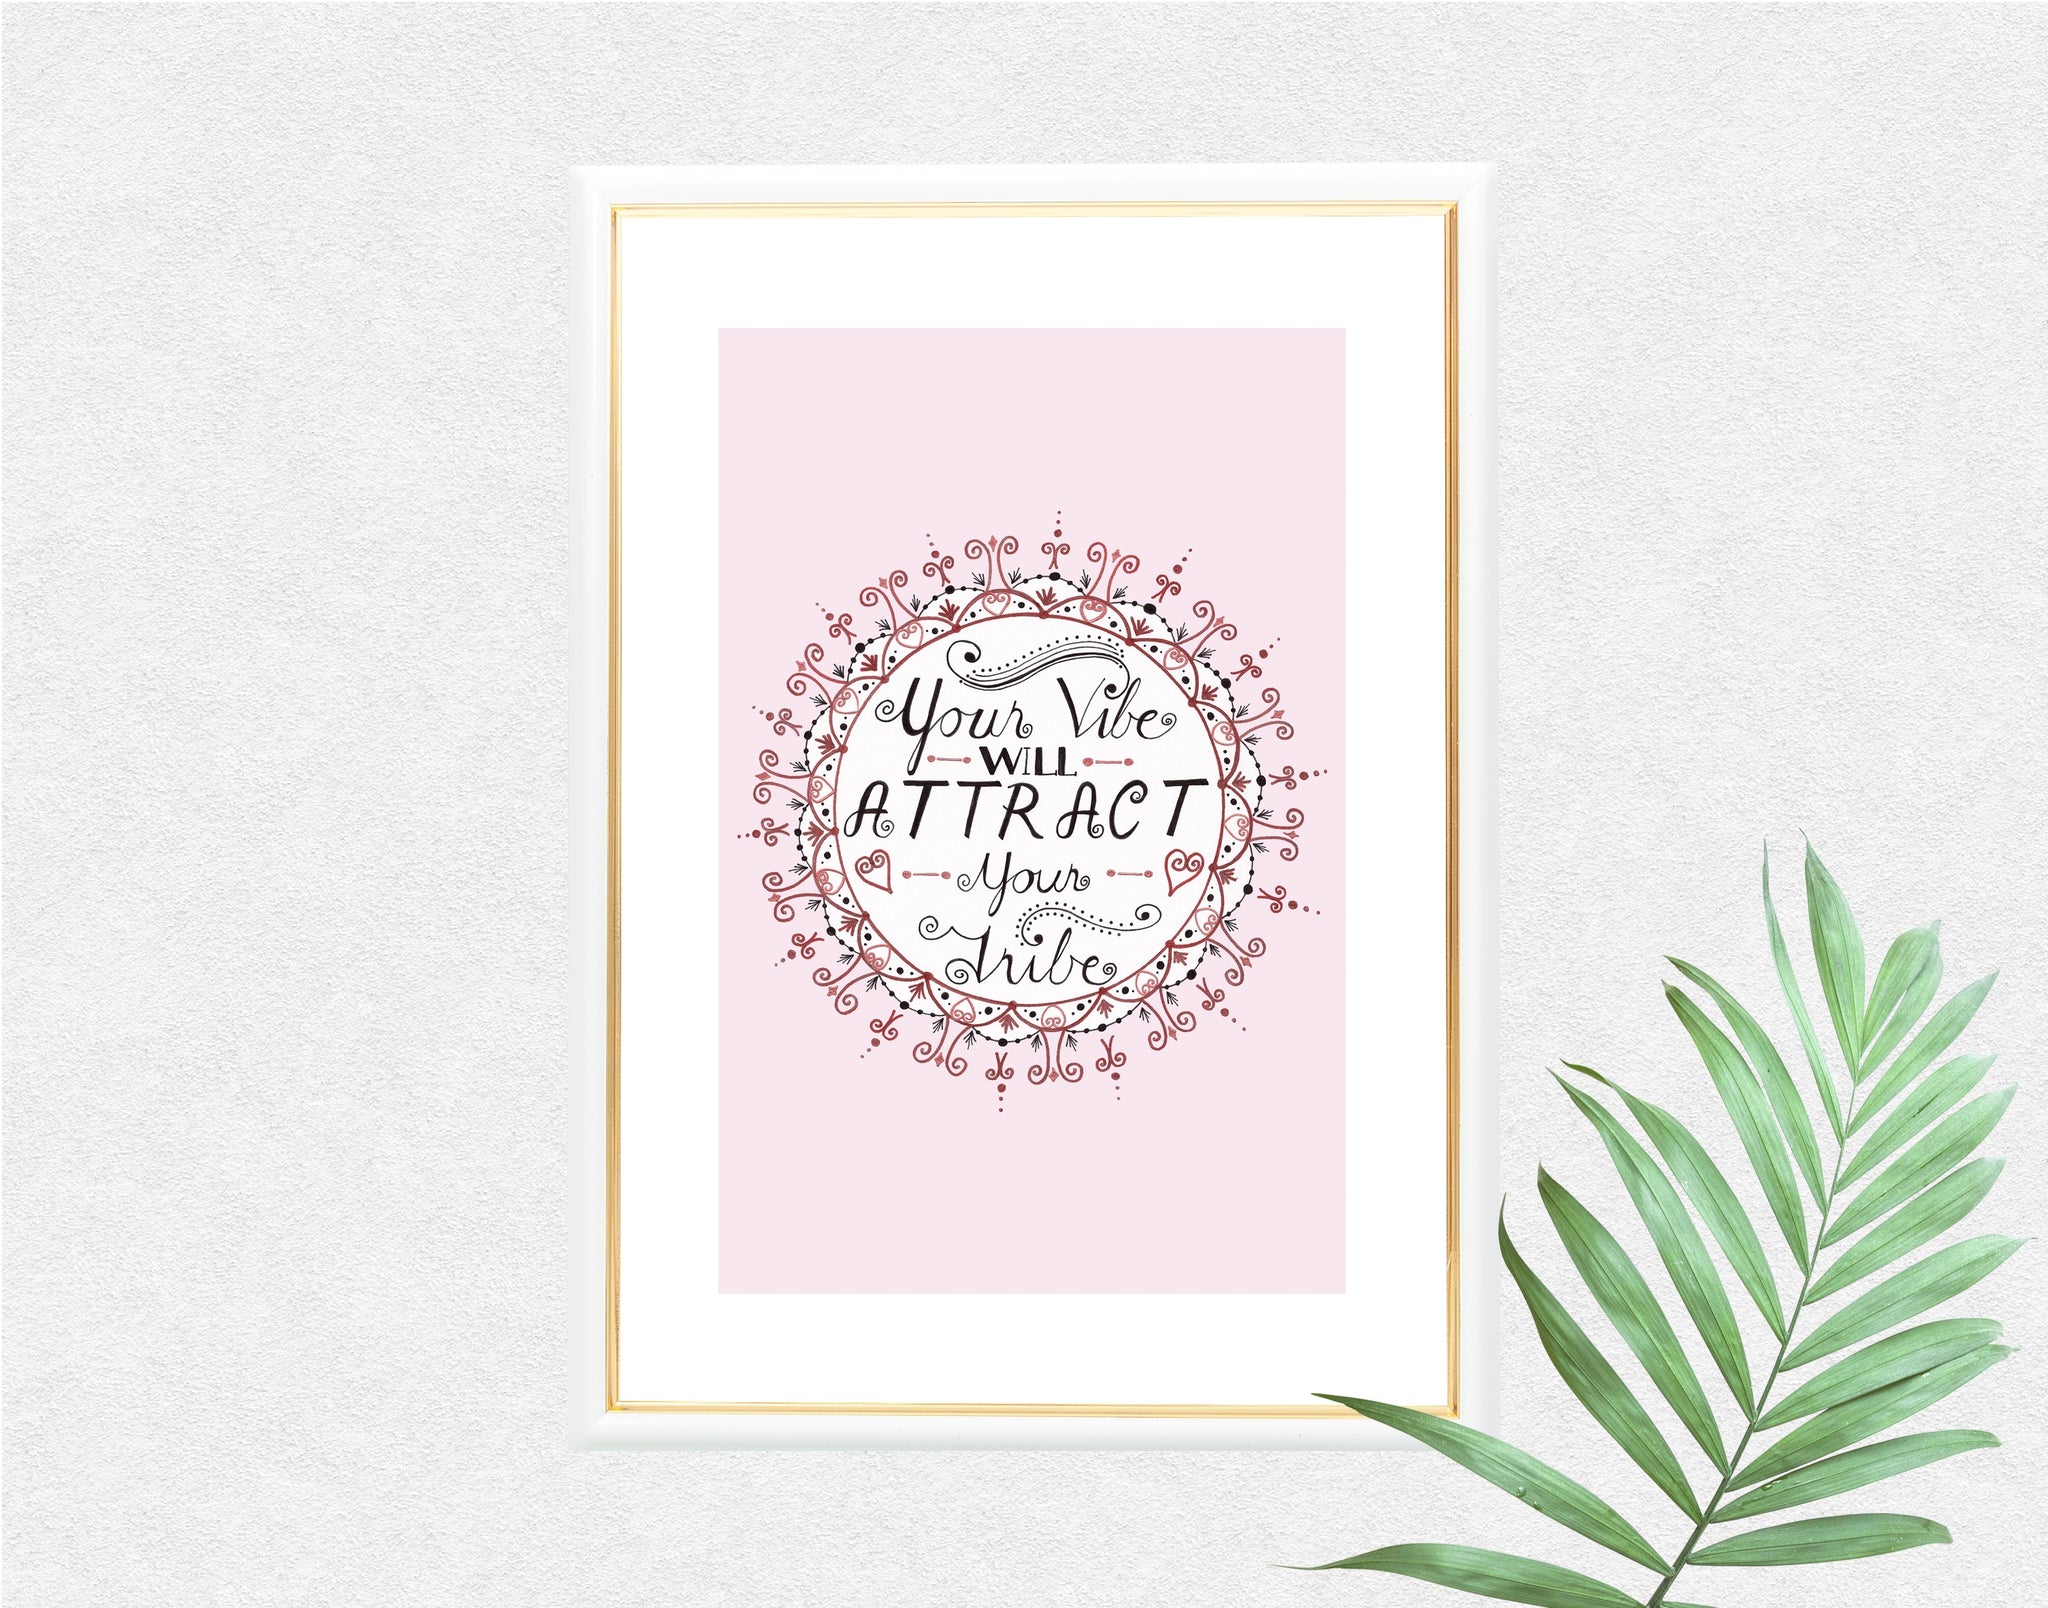 'Your Vibe Will Attract Your Tribe' Mandala Art Print